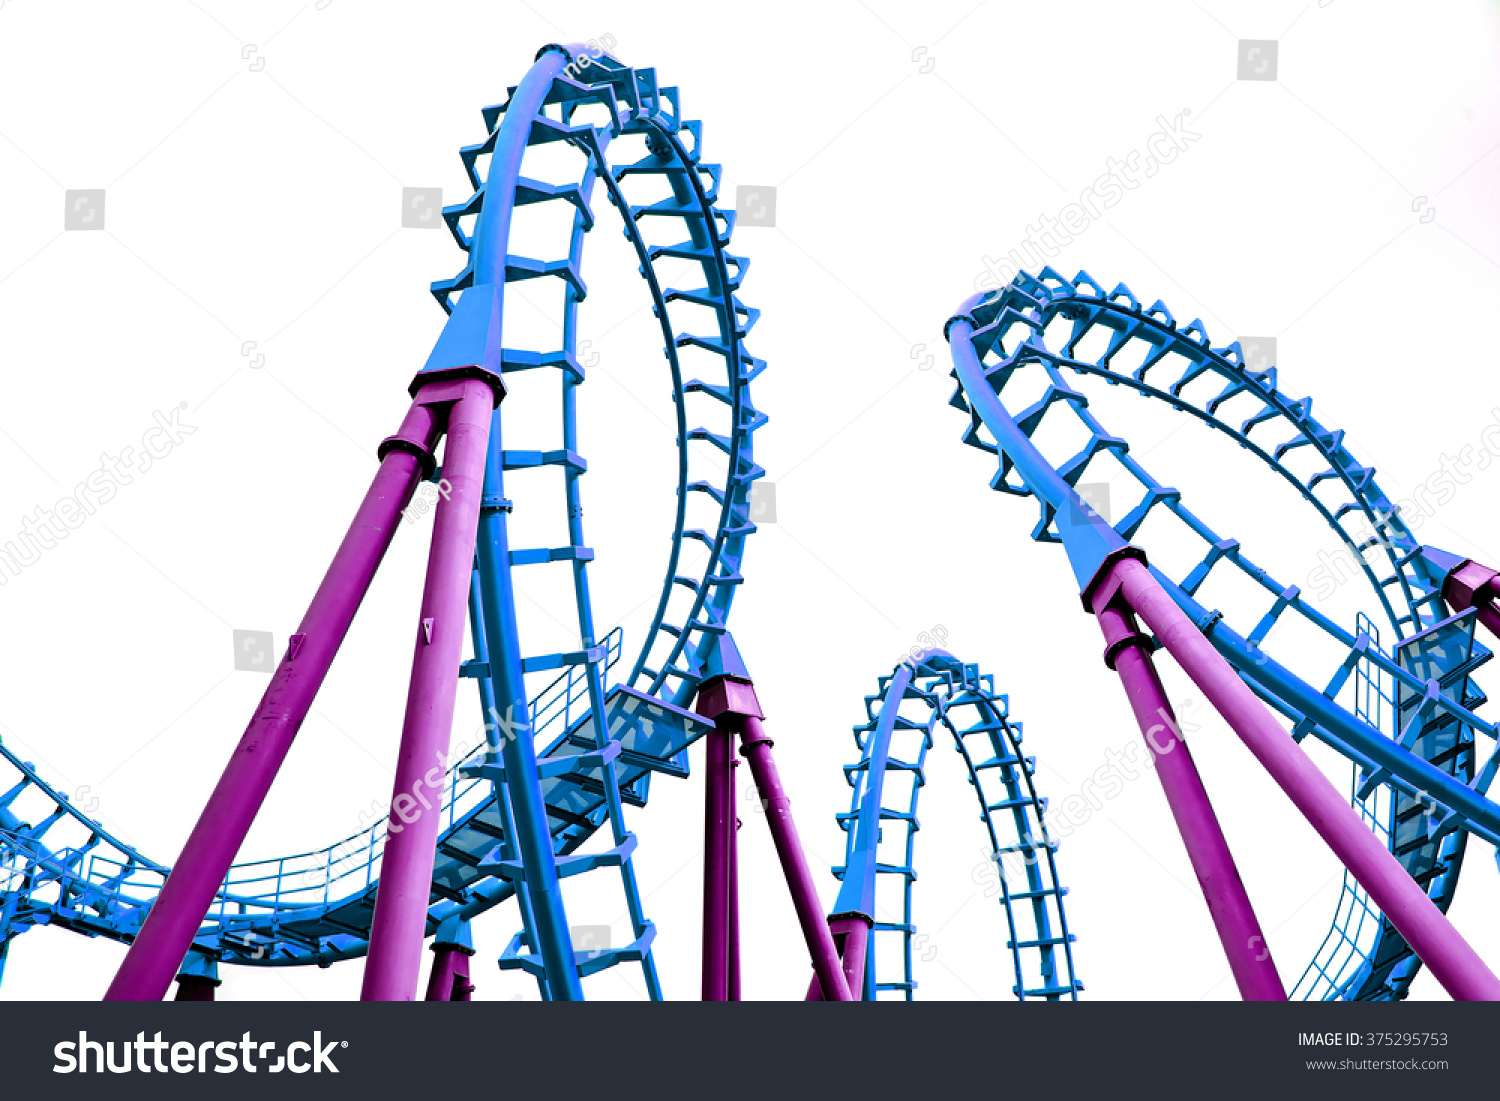 Pop Art Color Roller Coaster Isolated Stock Photo 375295753 - Shutterstock